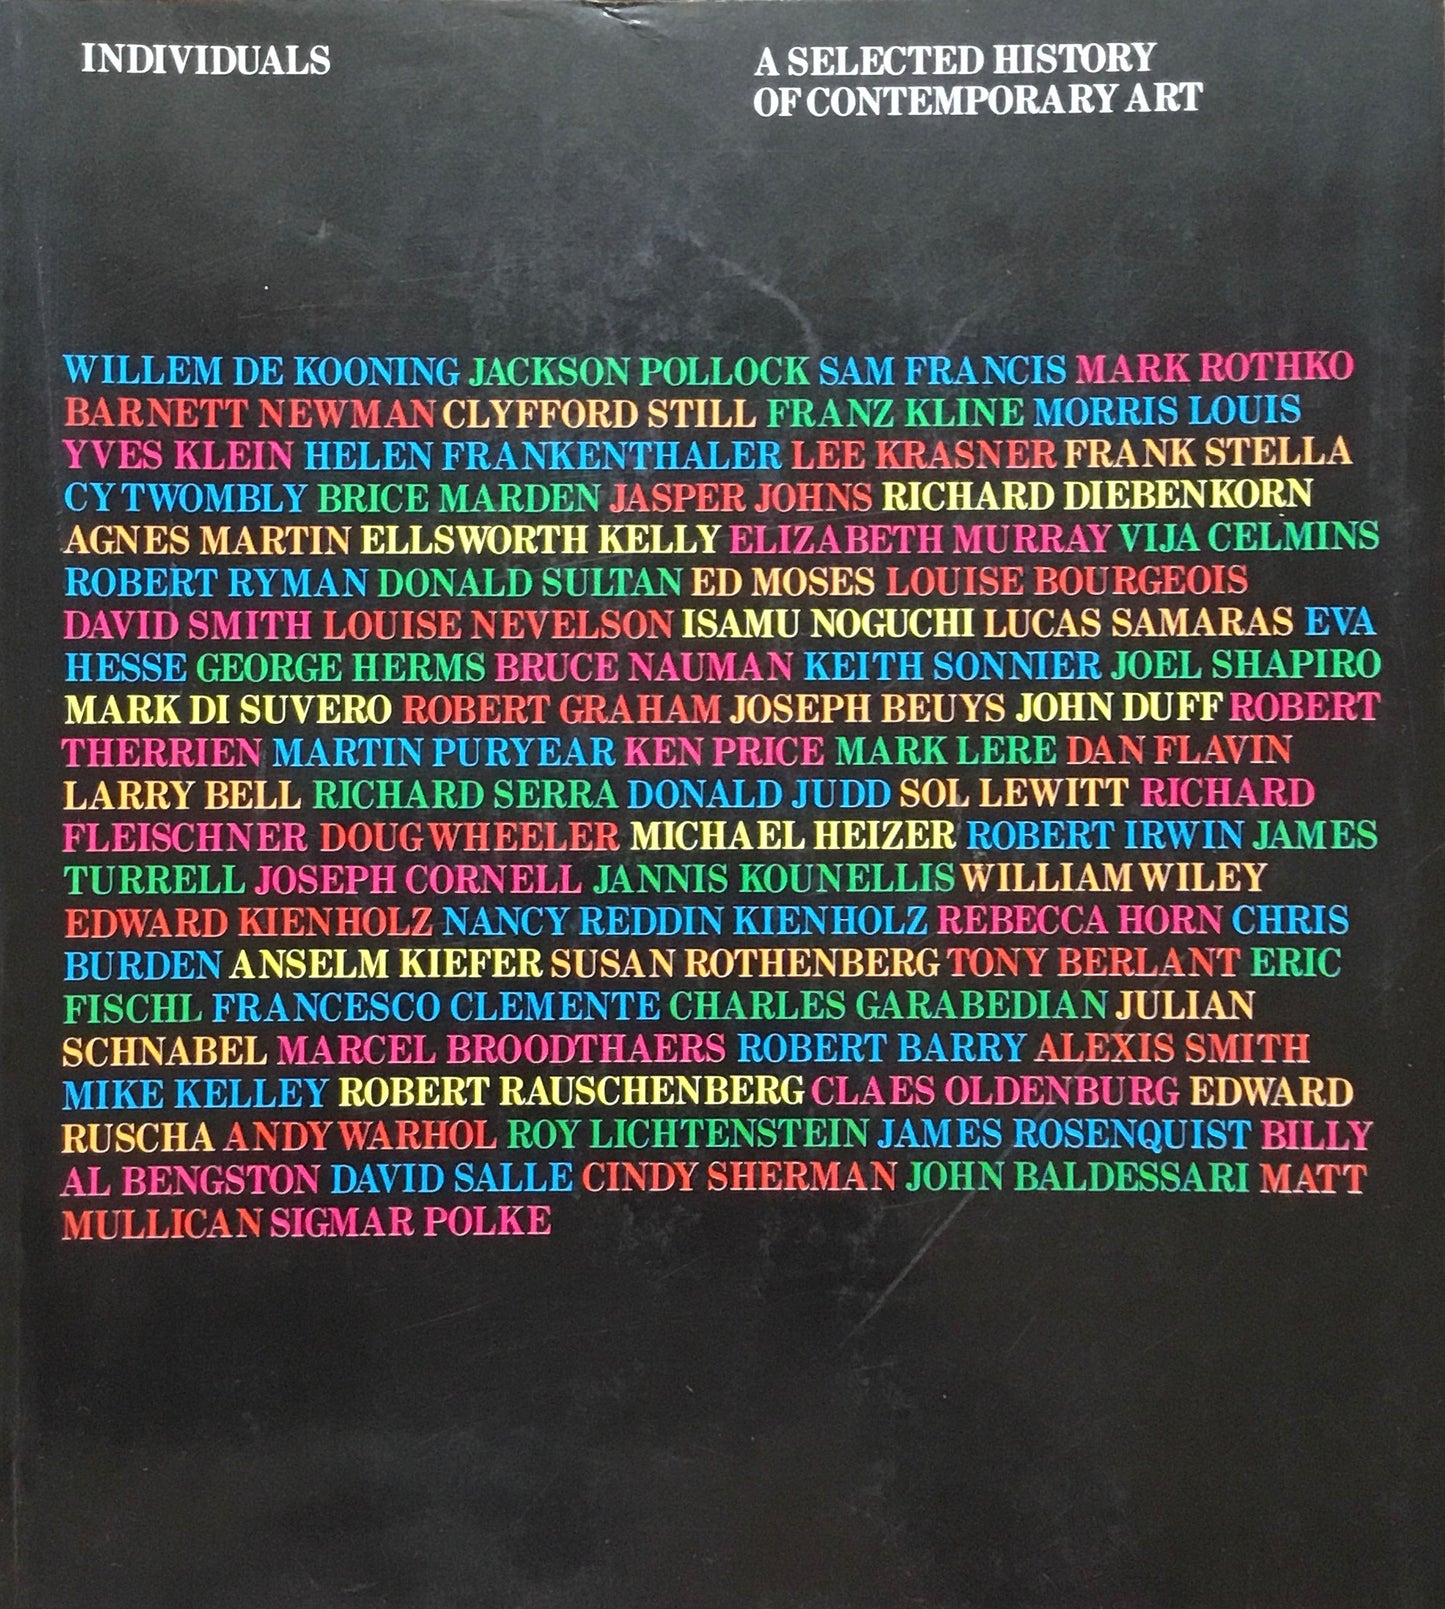 INDIVIDUALS  A SELECTED HISTORY OF CONTEMPORARY ART 1945-1986